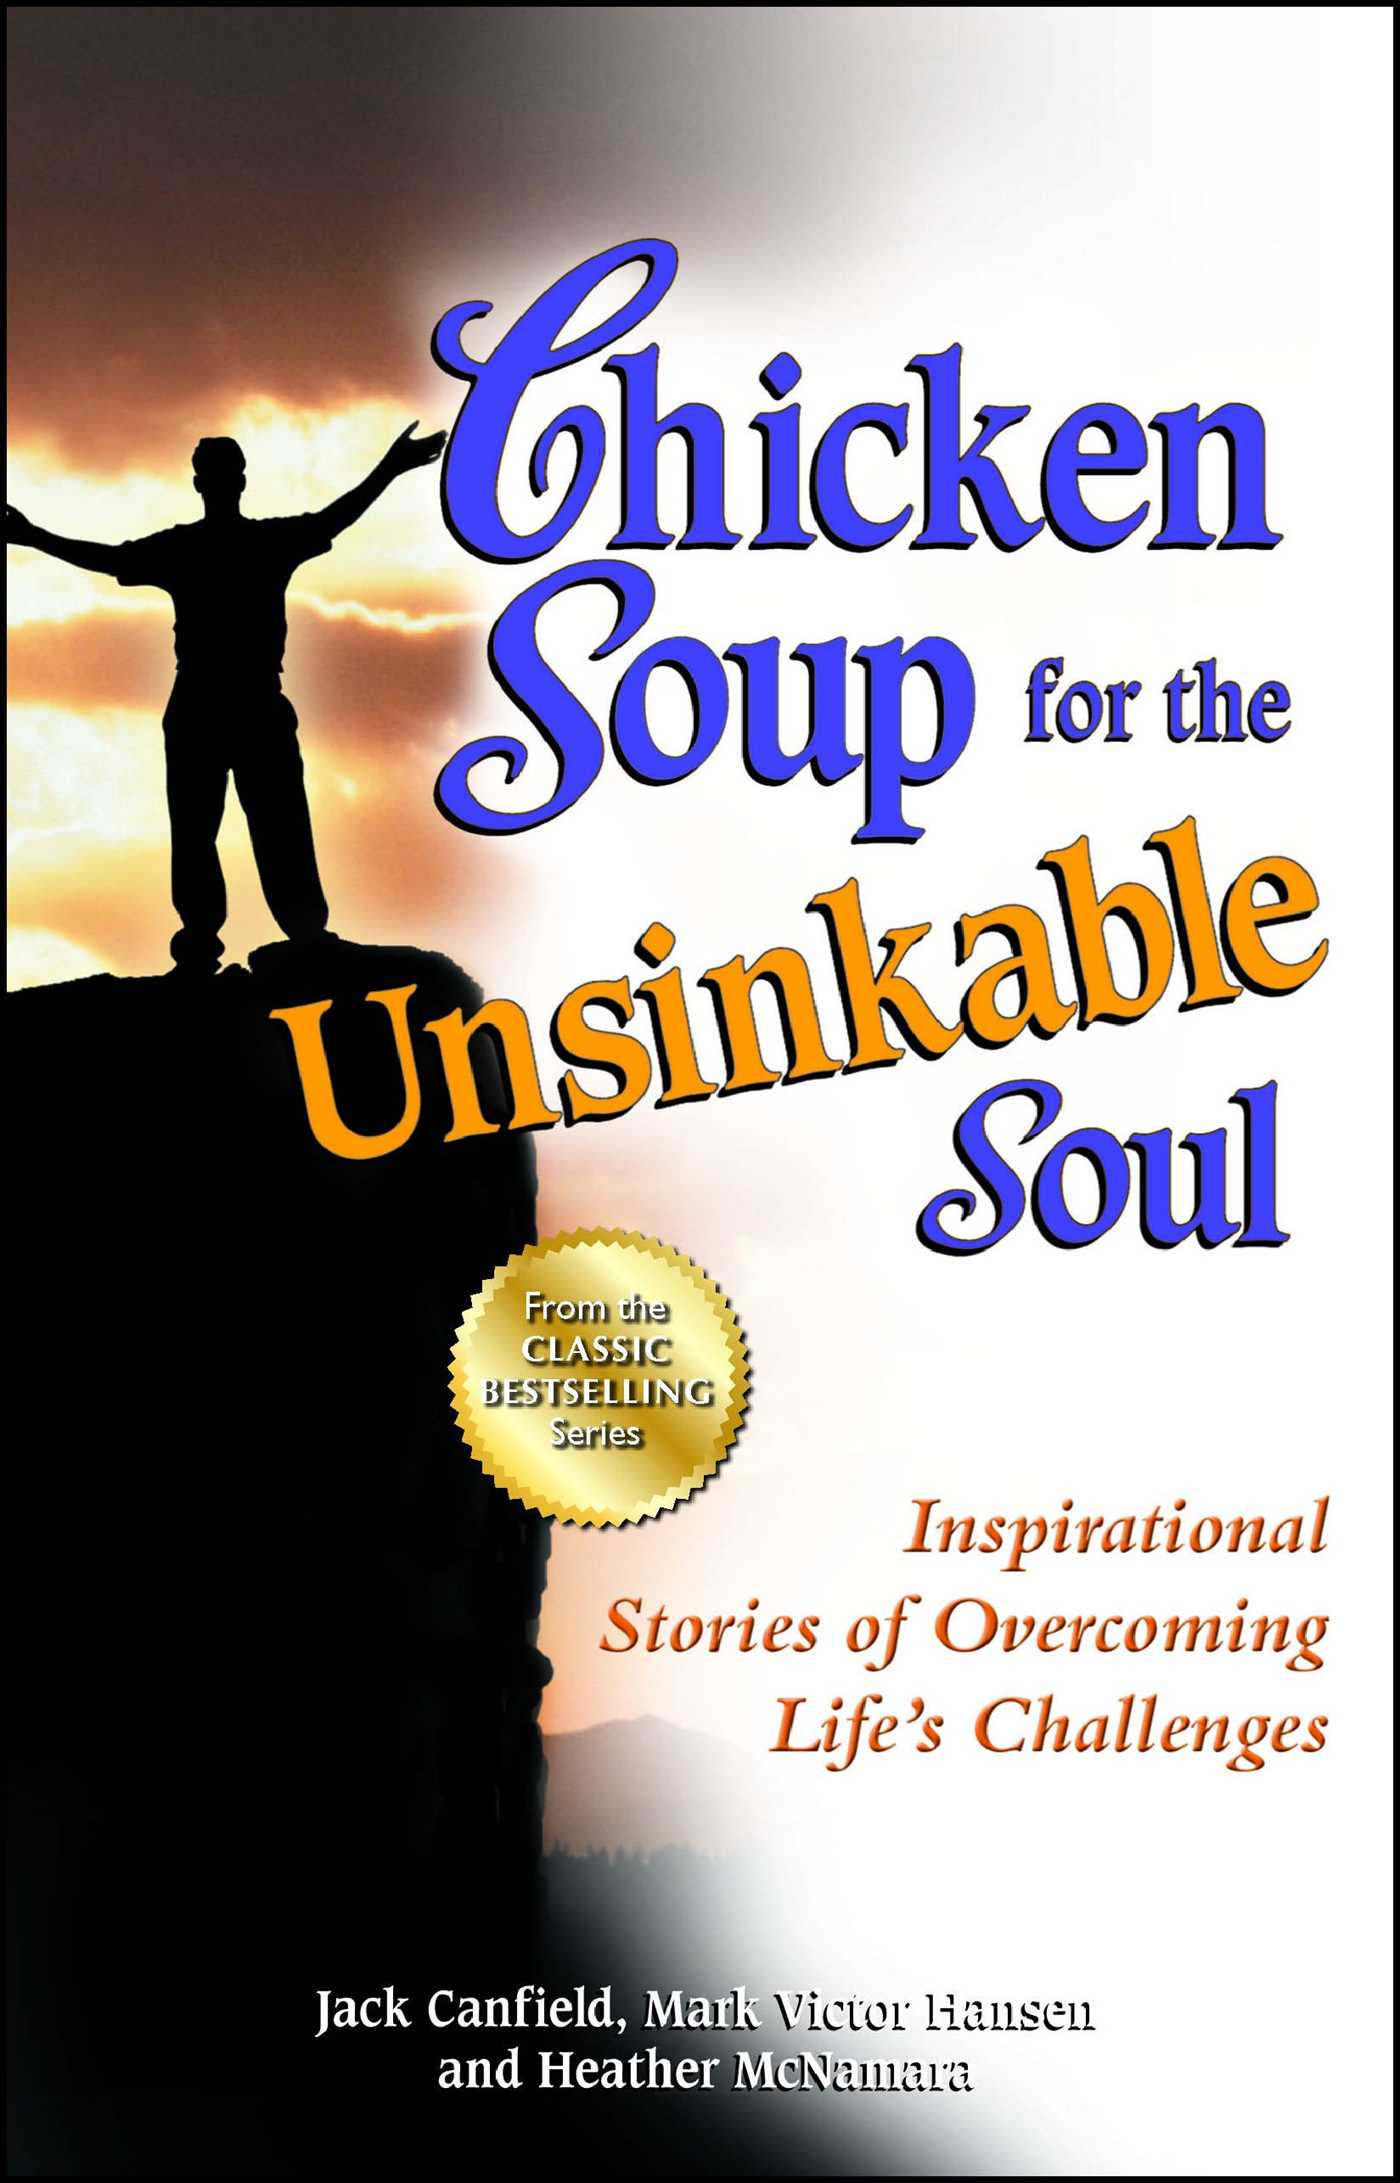 15 Of the Best Real Simple Chicken soup for the soul Books
 Ever